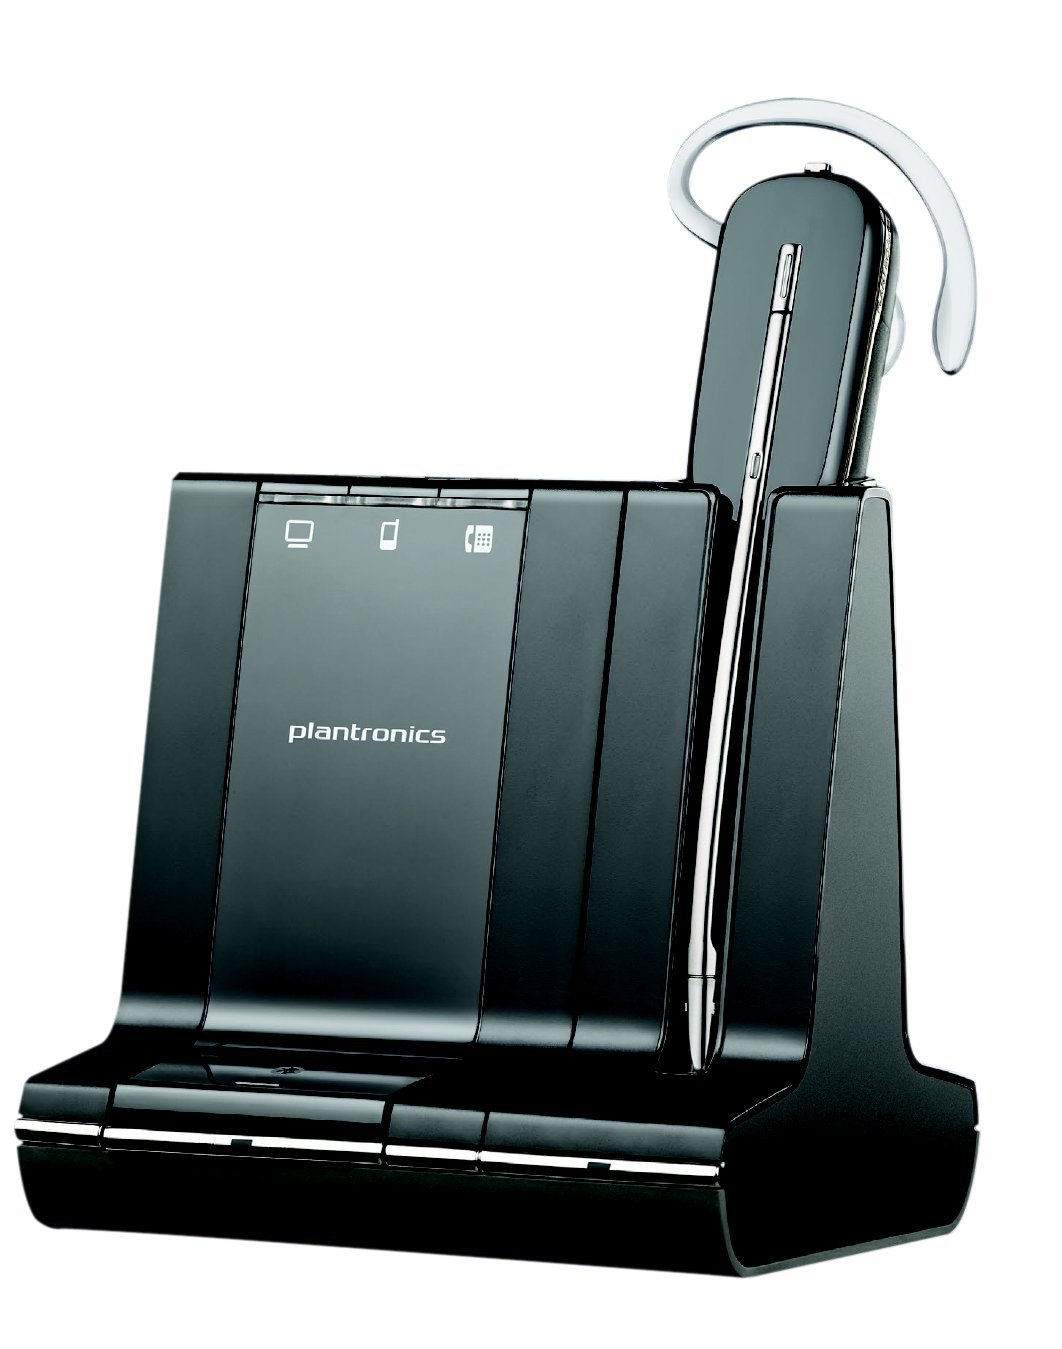 W745-M SAVI 3 in 1 with Battery Charger Plantronics